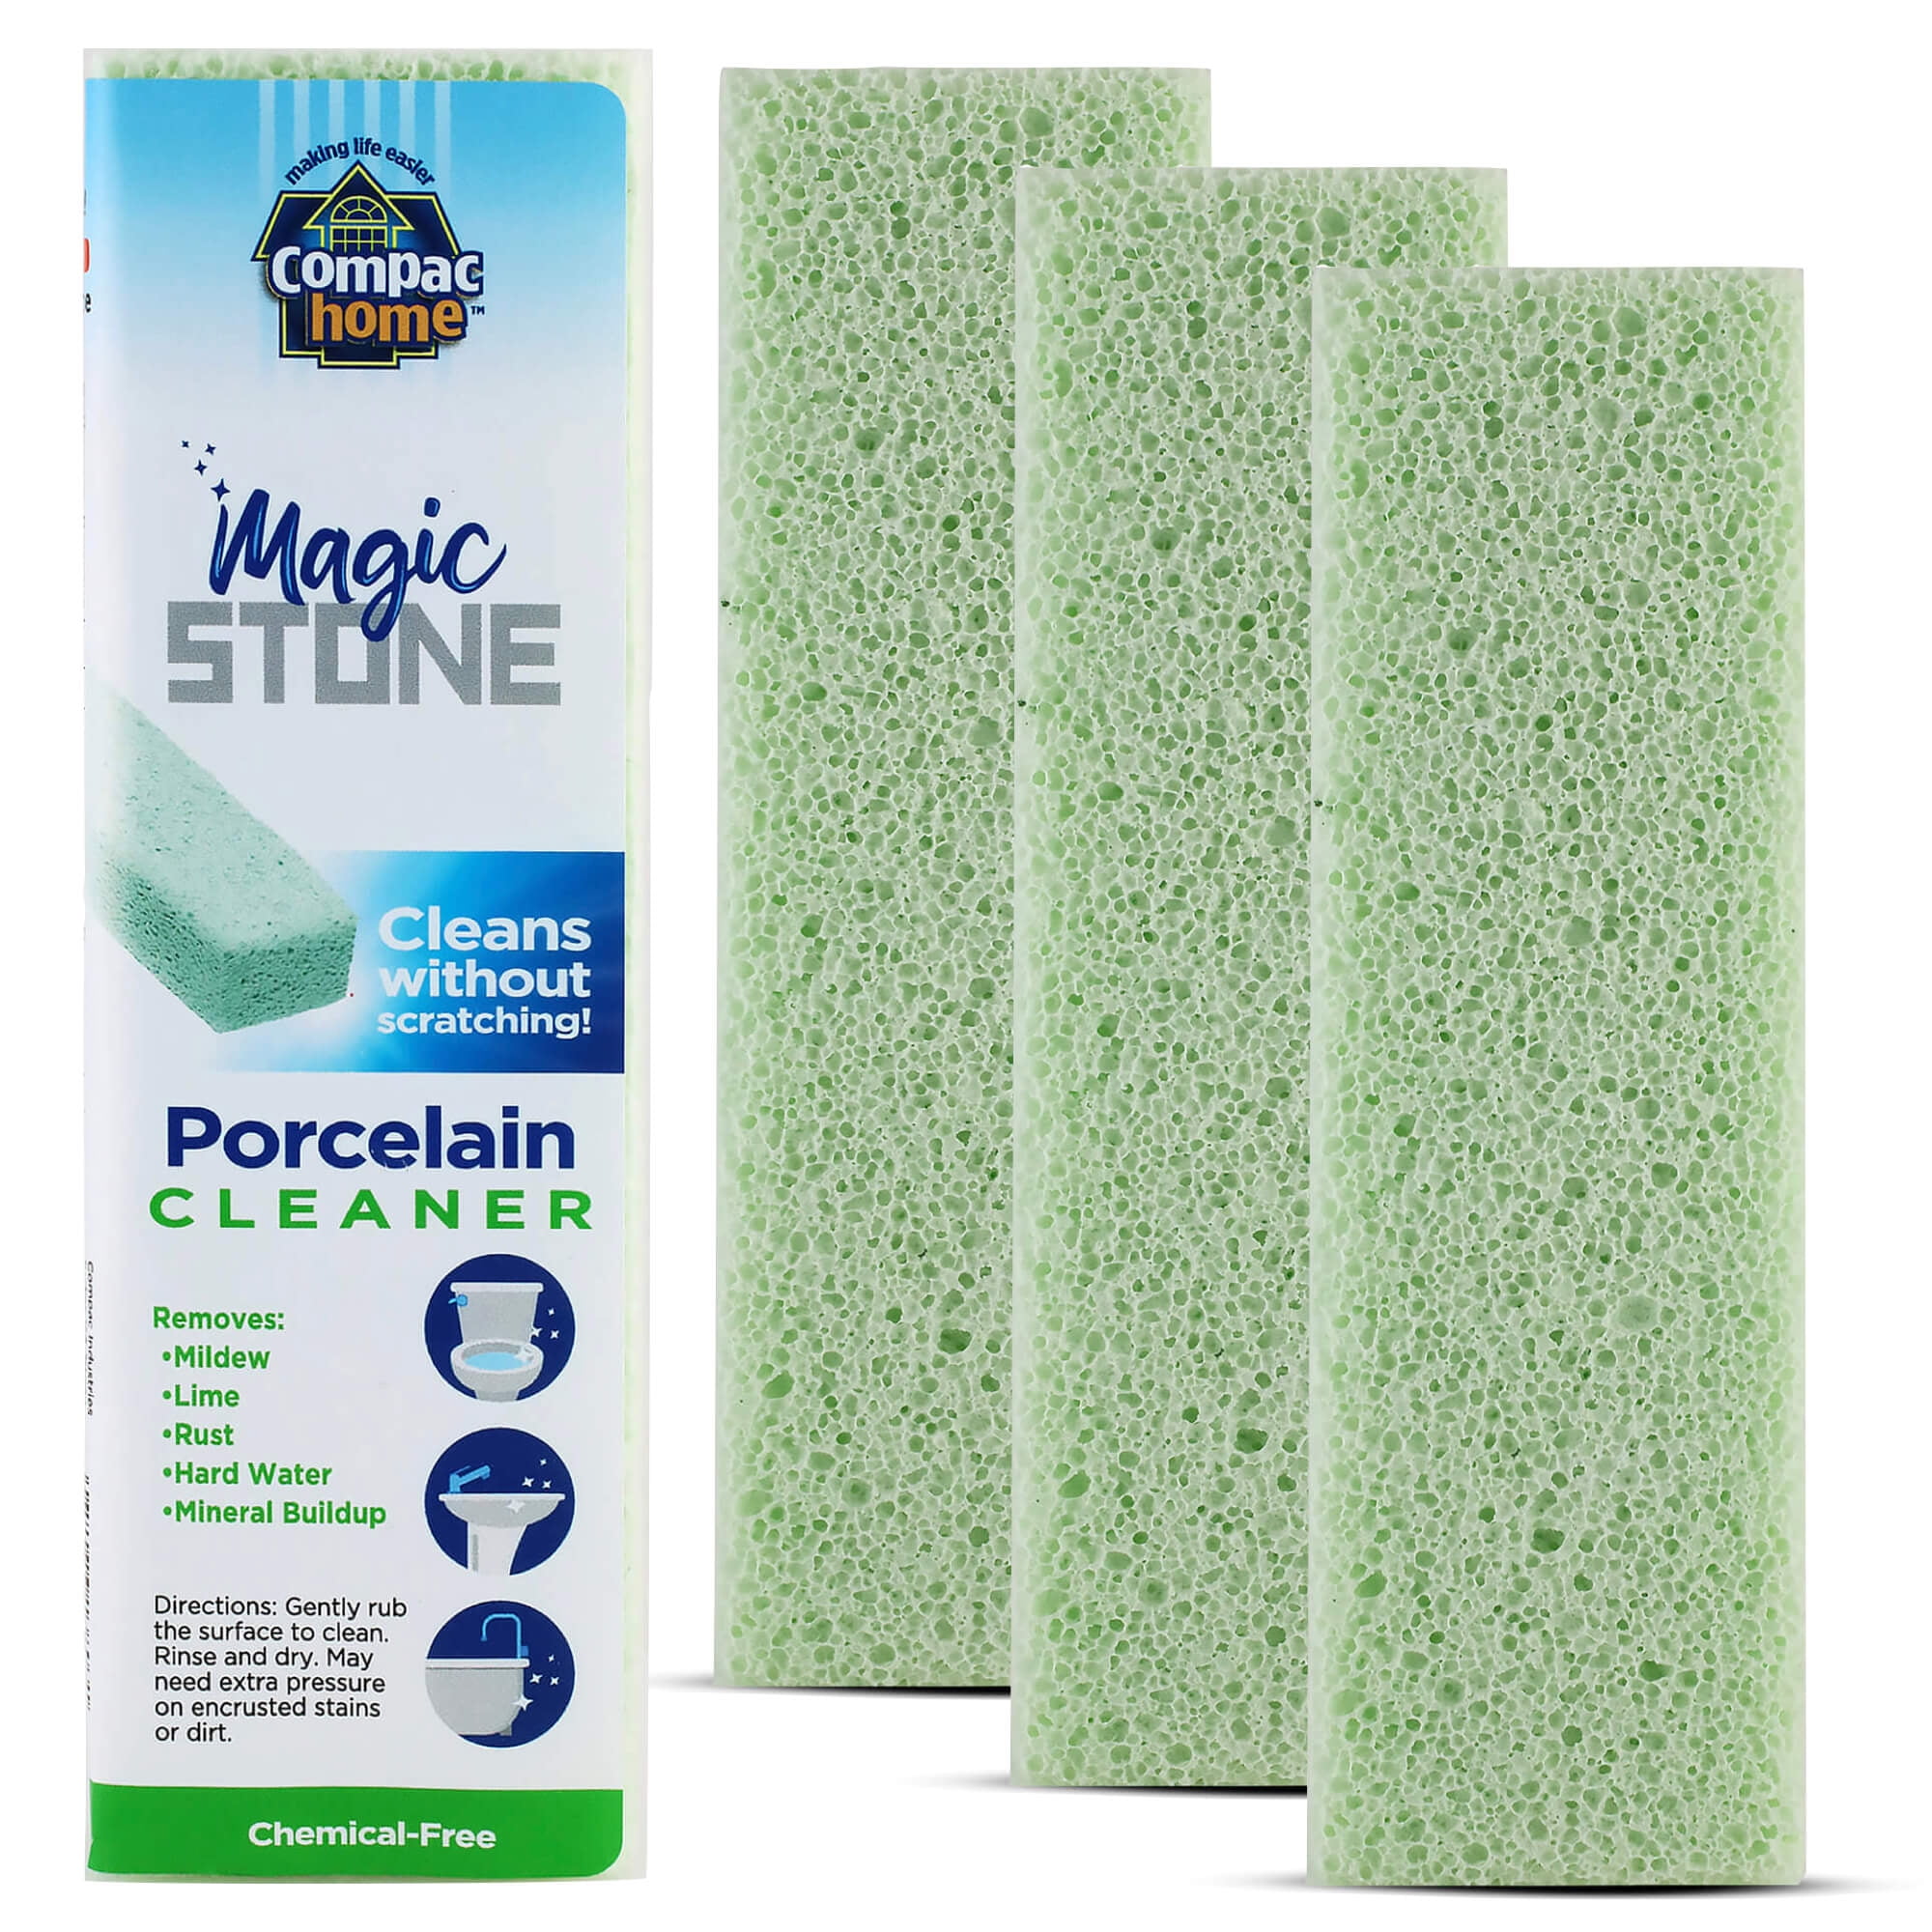 Compac Home Magic Stone Porcelain Cleaning Stick Toilet Bowl Cleaner,  Easily Scrubs/Removes Stubborn Lime Stains, 2pk 